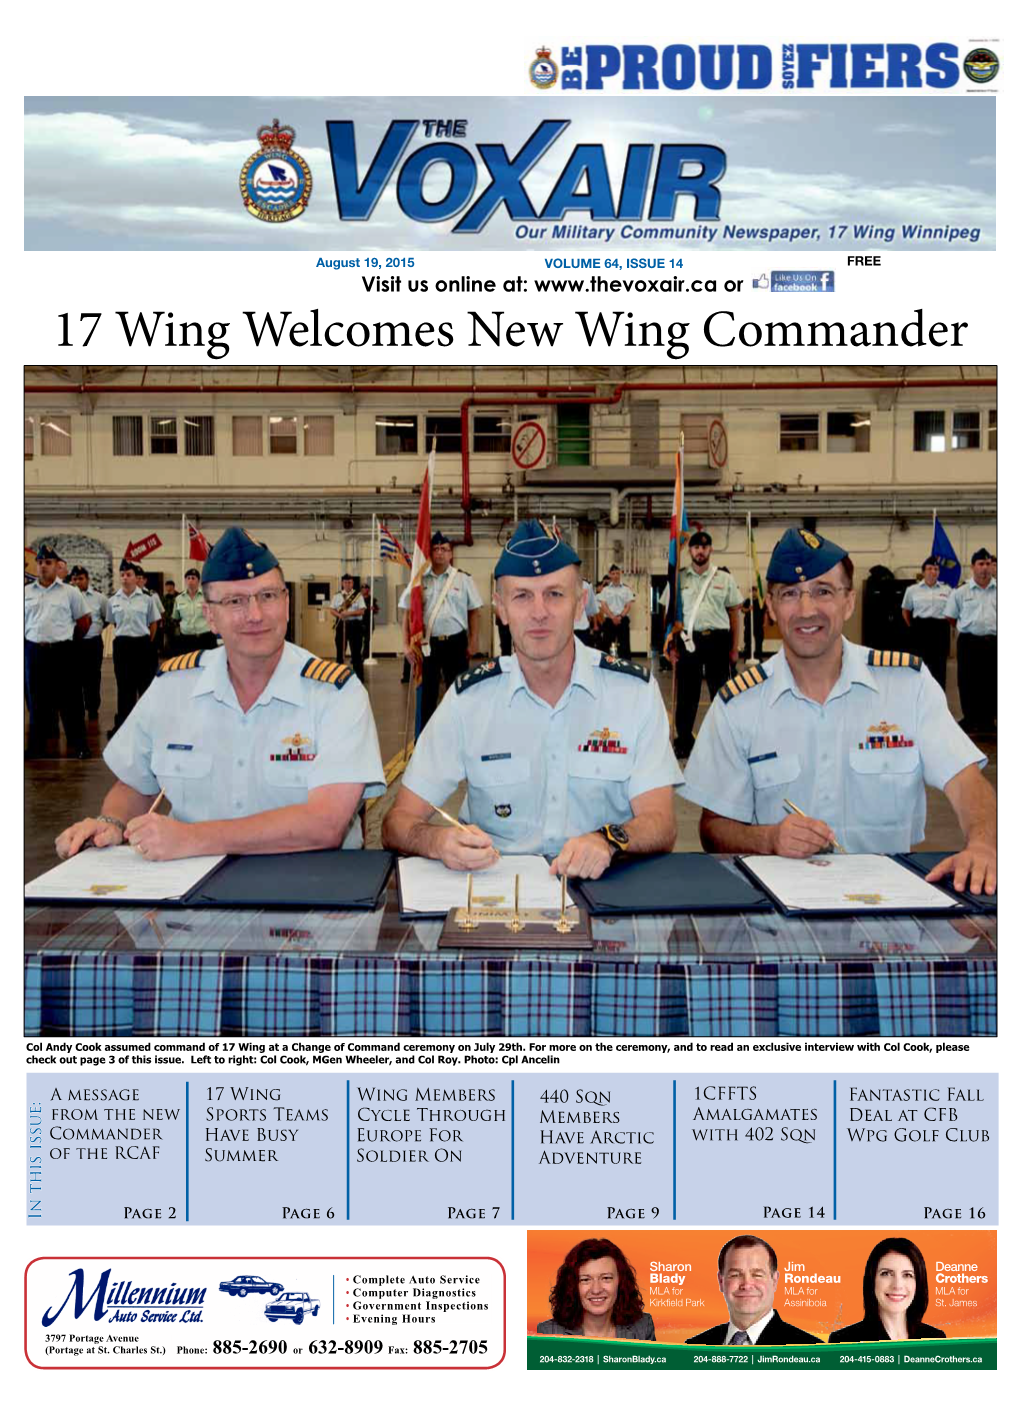 17 Wing Welcomes New Wing Commander